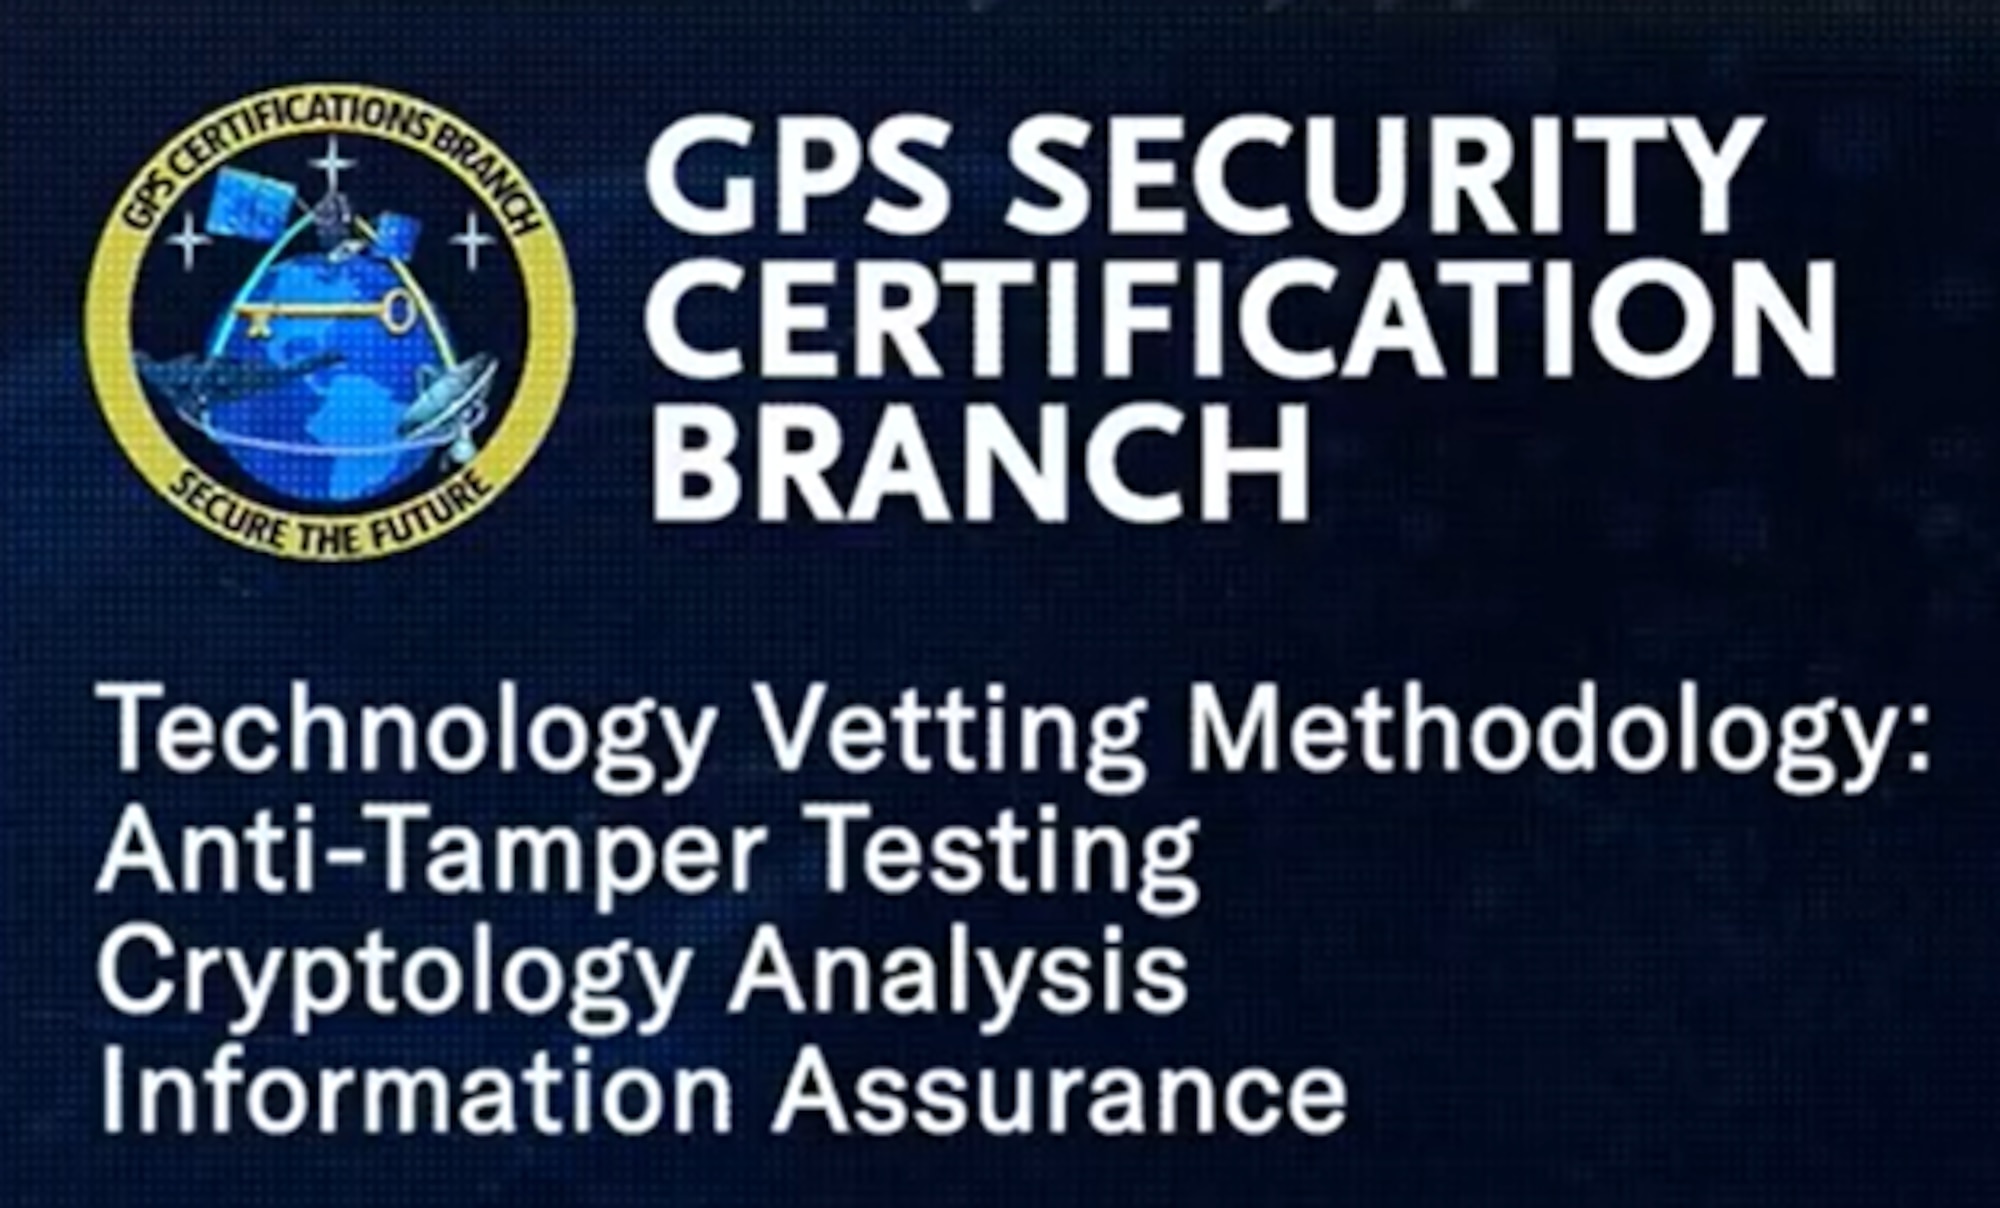 GPS Security Certification Branch